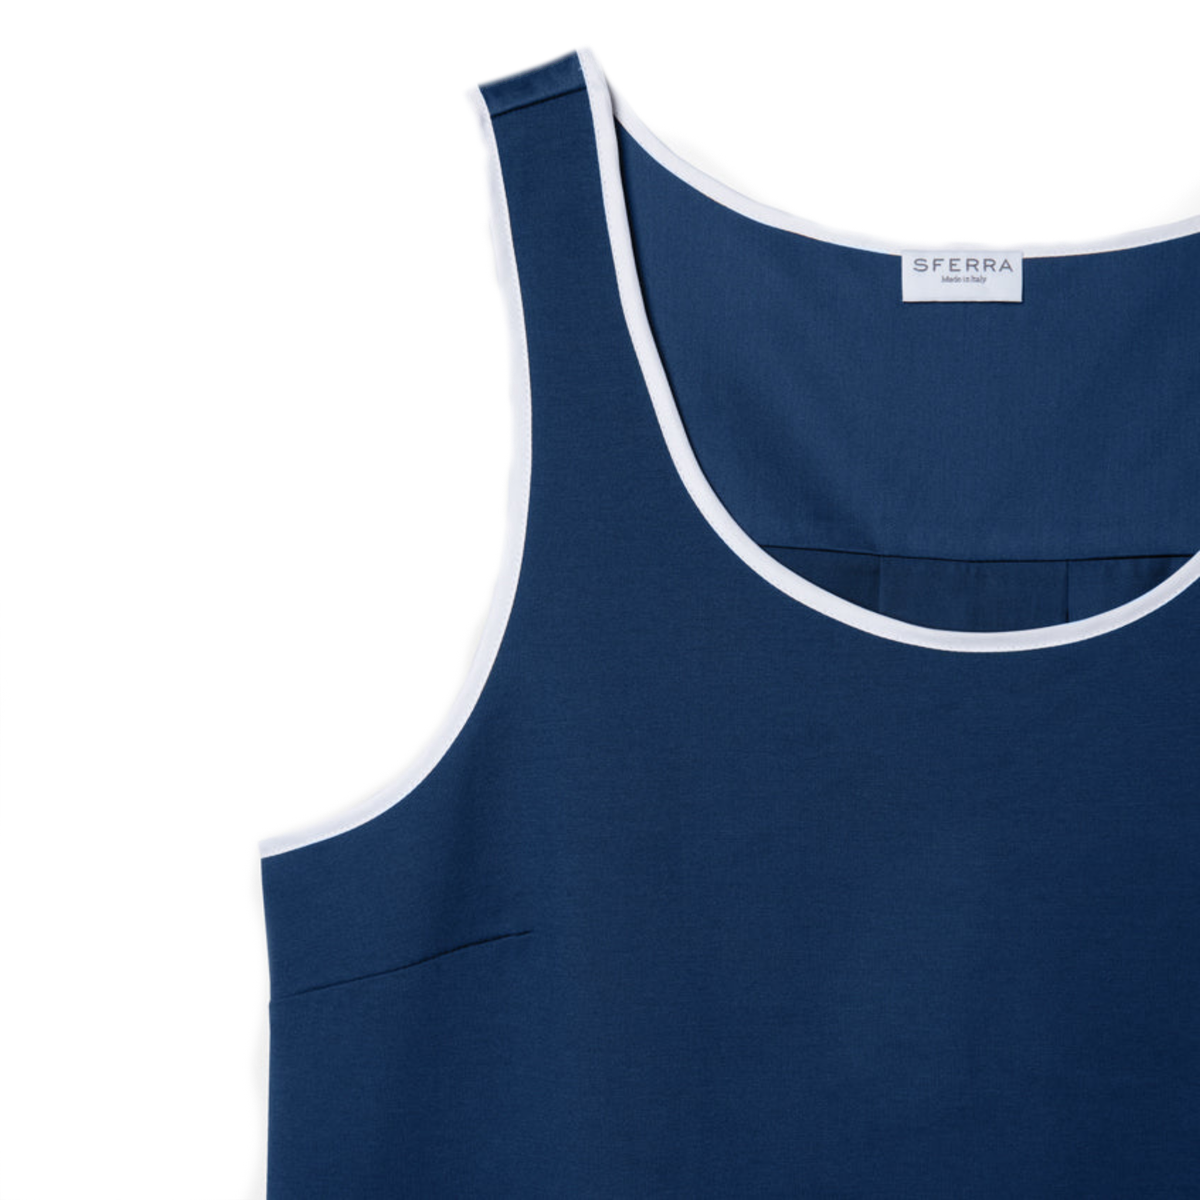 Corner View of Navy Sferra Caricia Swing Tank Top against a white background